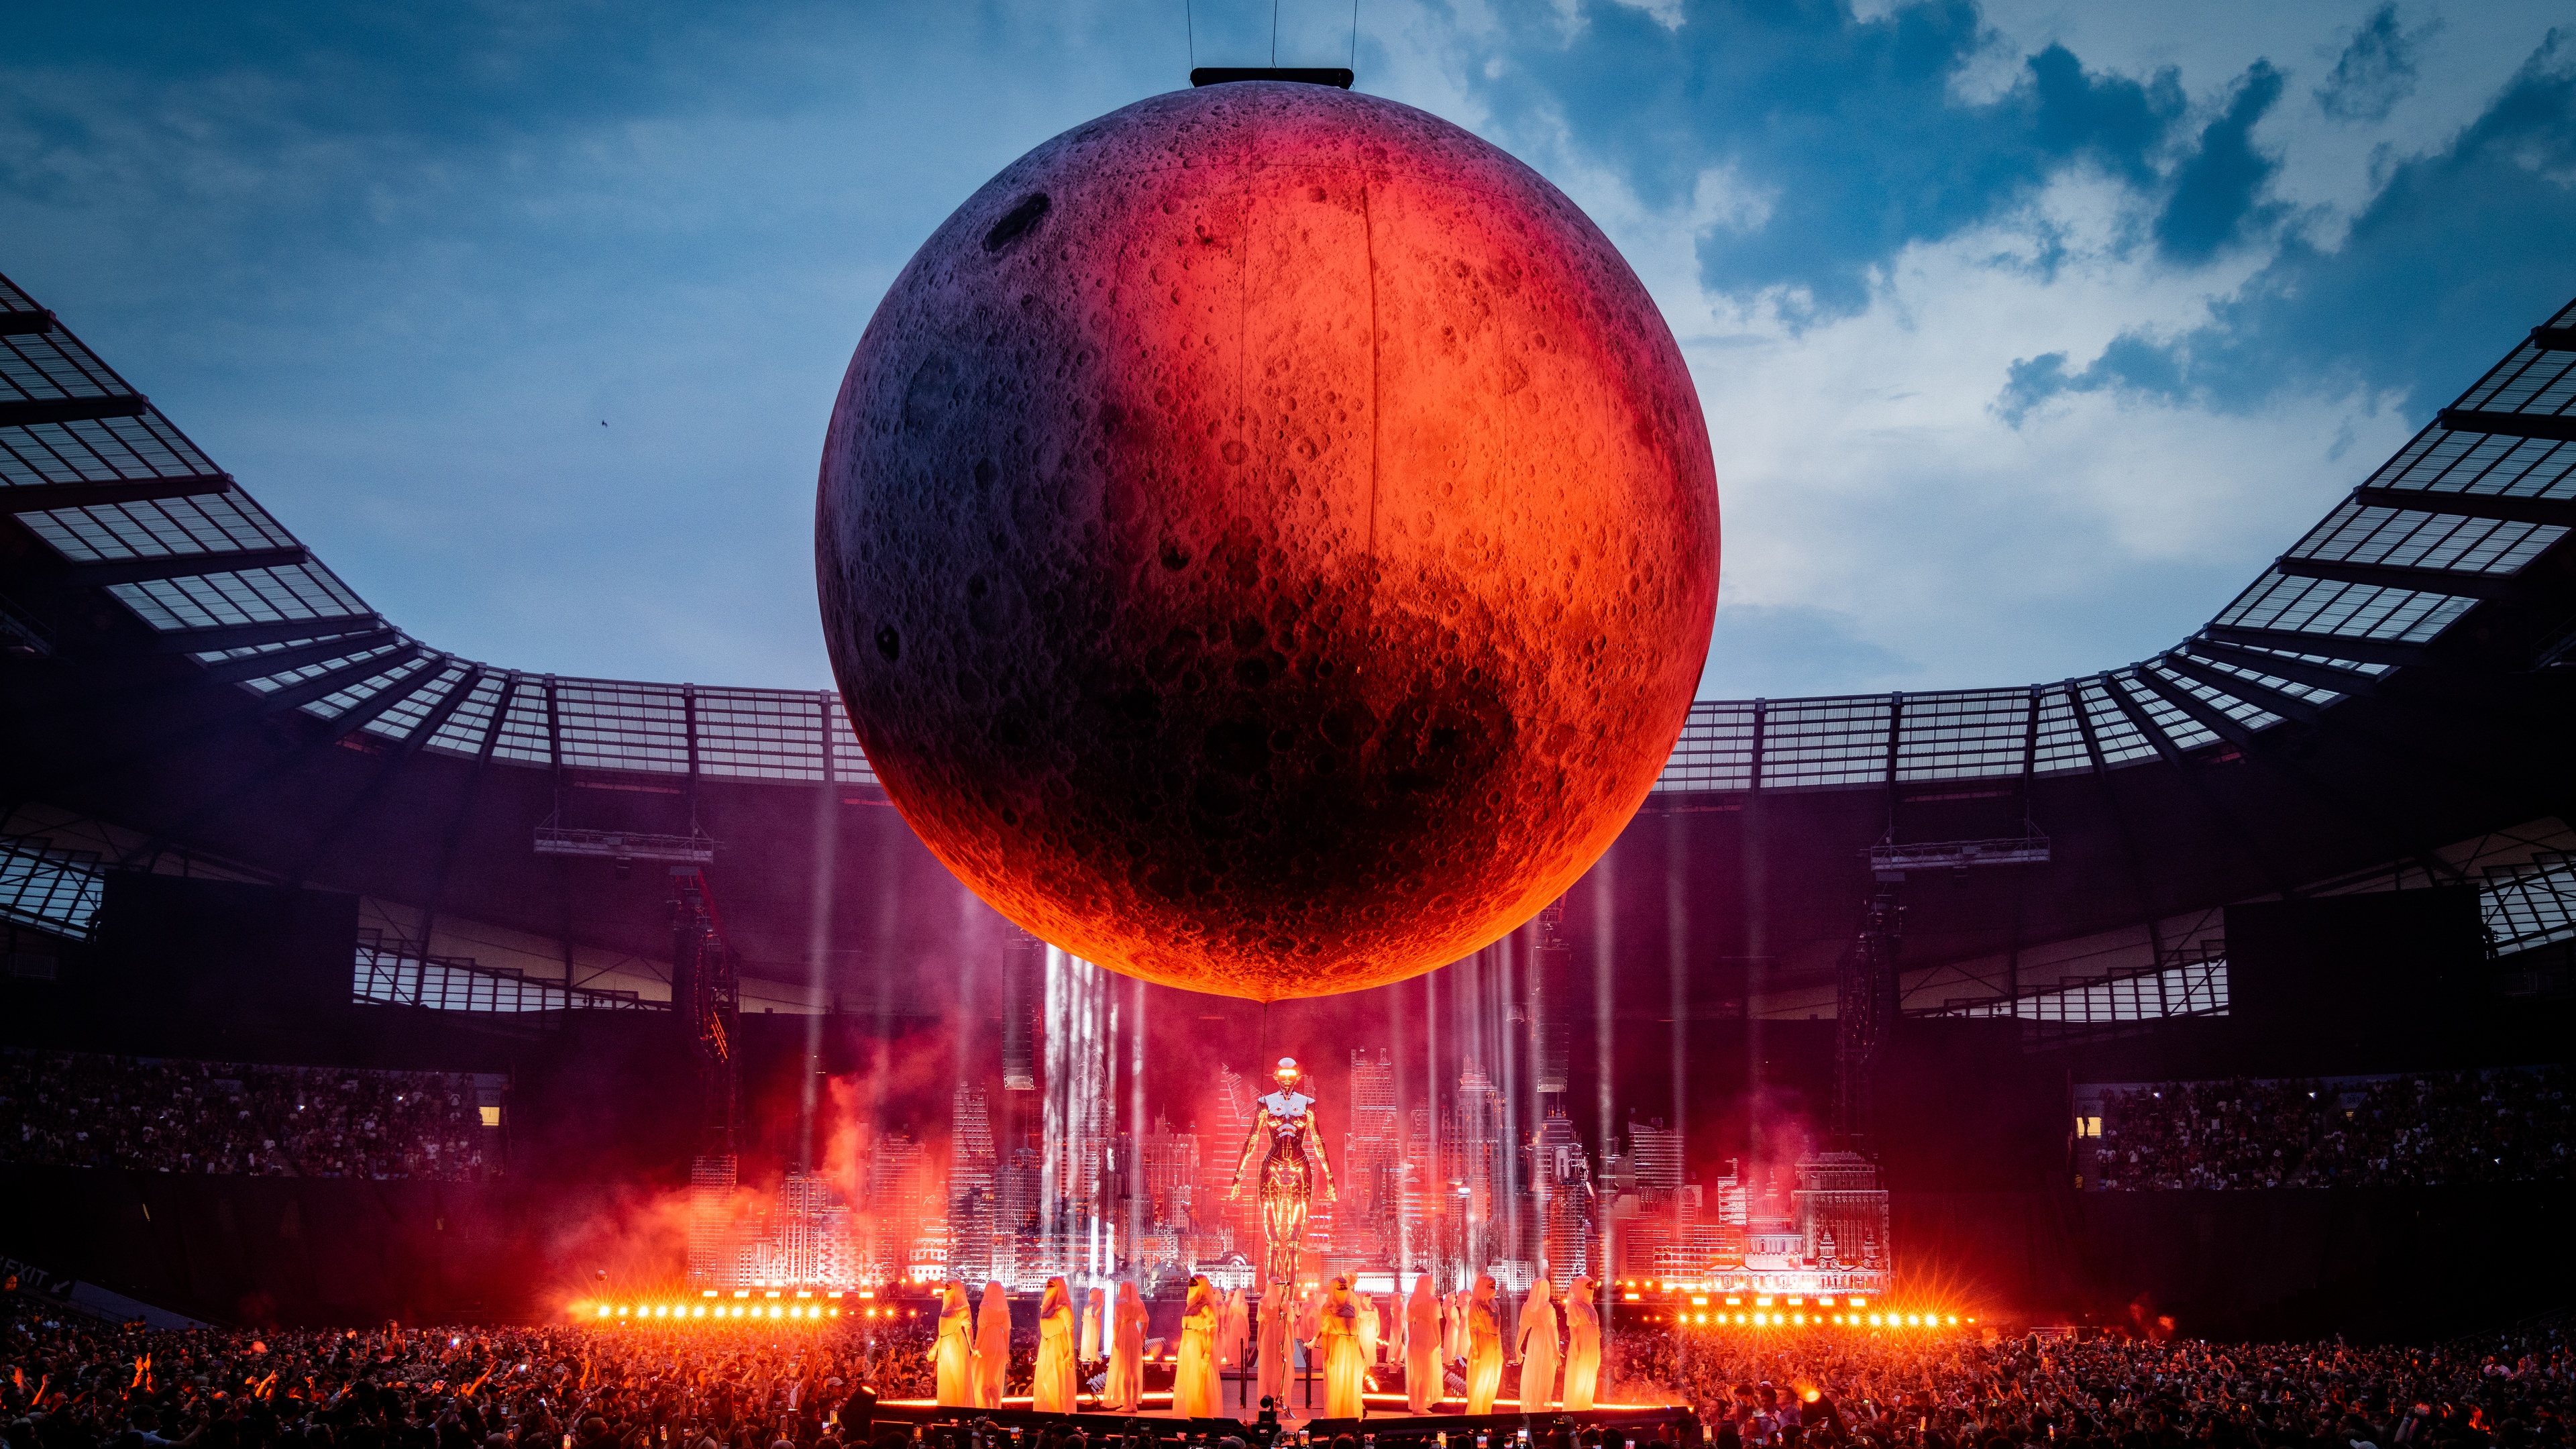 The Weend Stage set up including huge metallic scenic sculpture and red moon in a stadium